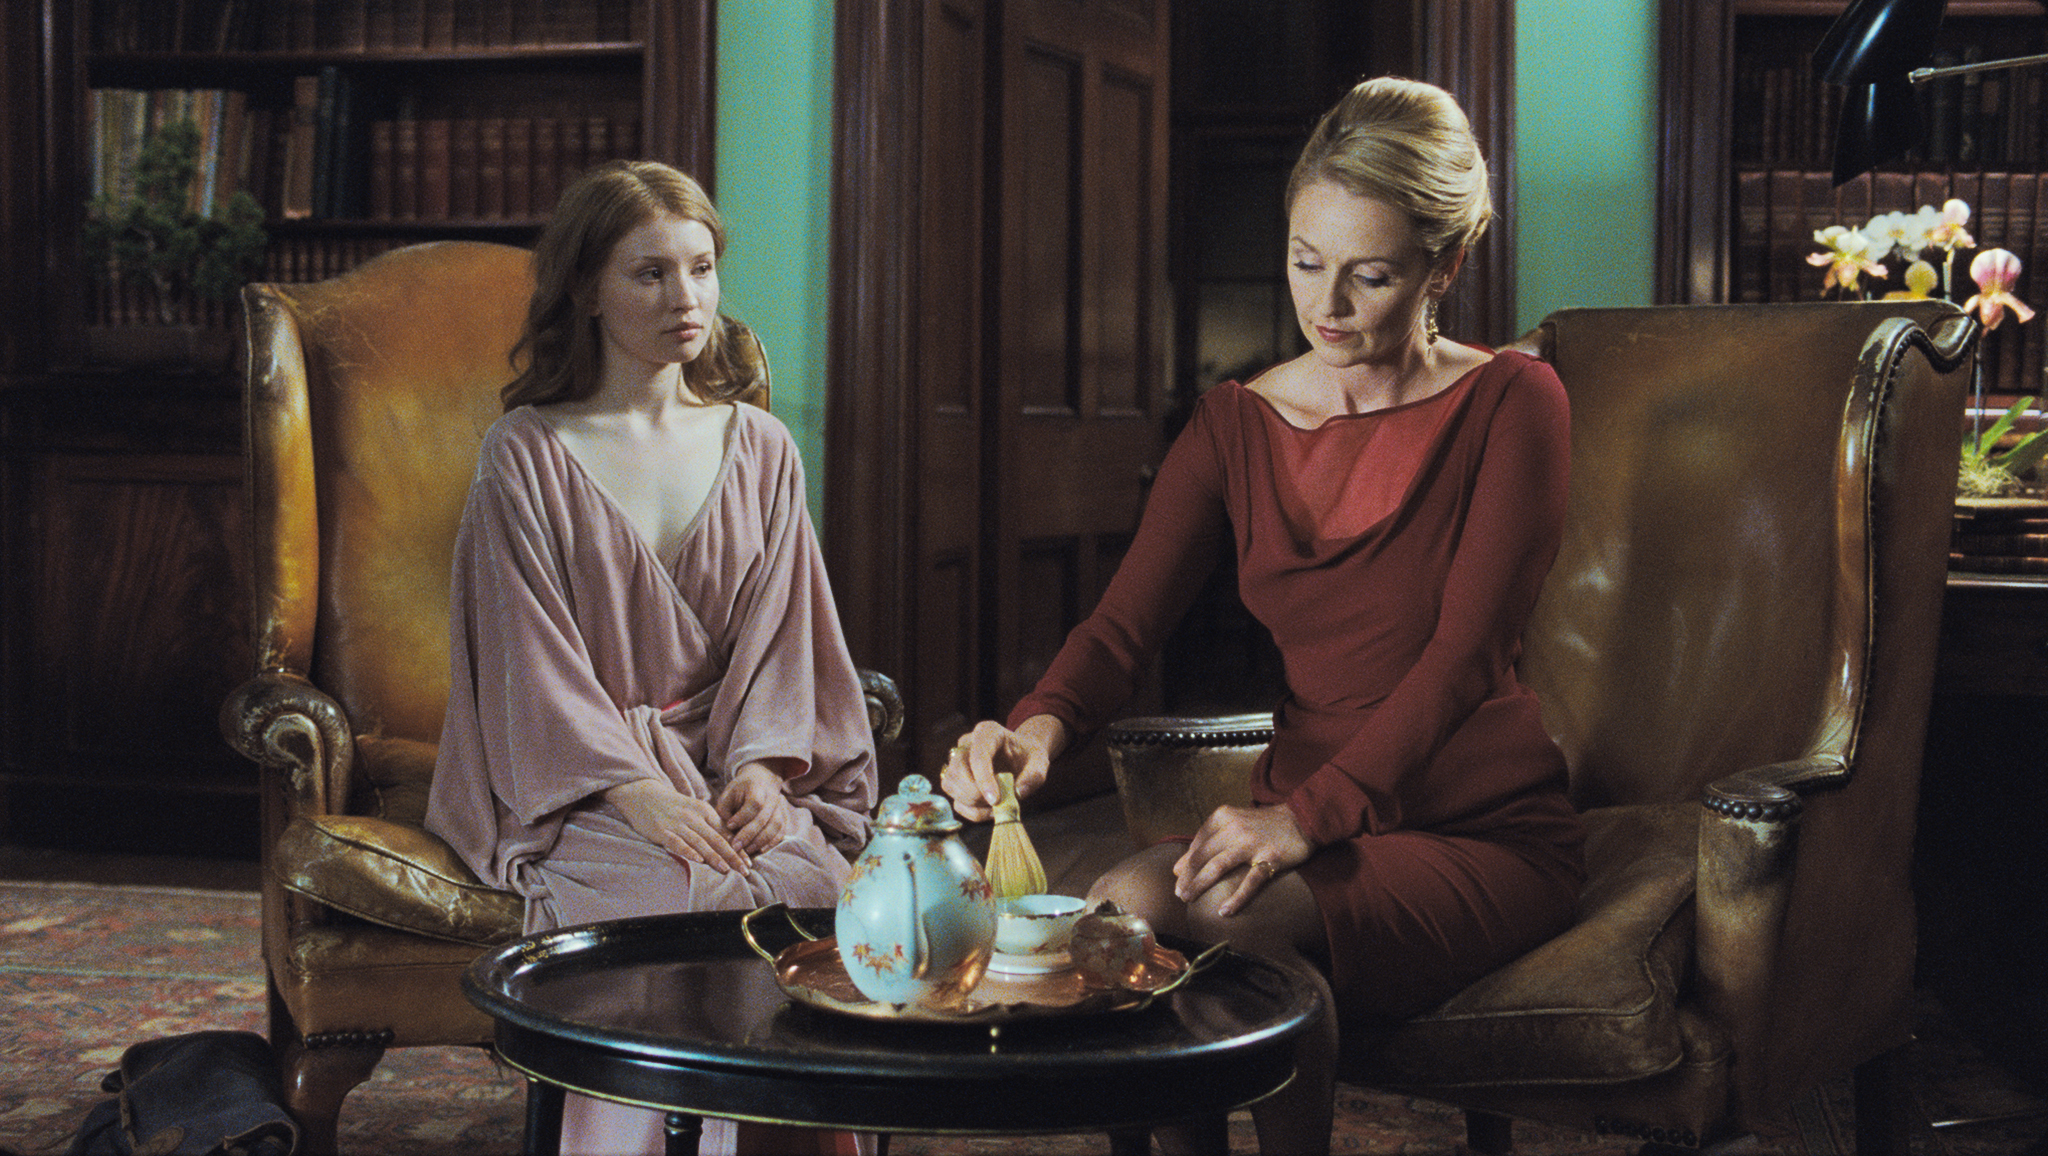 Still of Rachael Blake and Emily Browning in Miegancioji grazuole (2011)